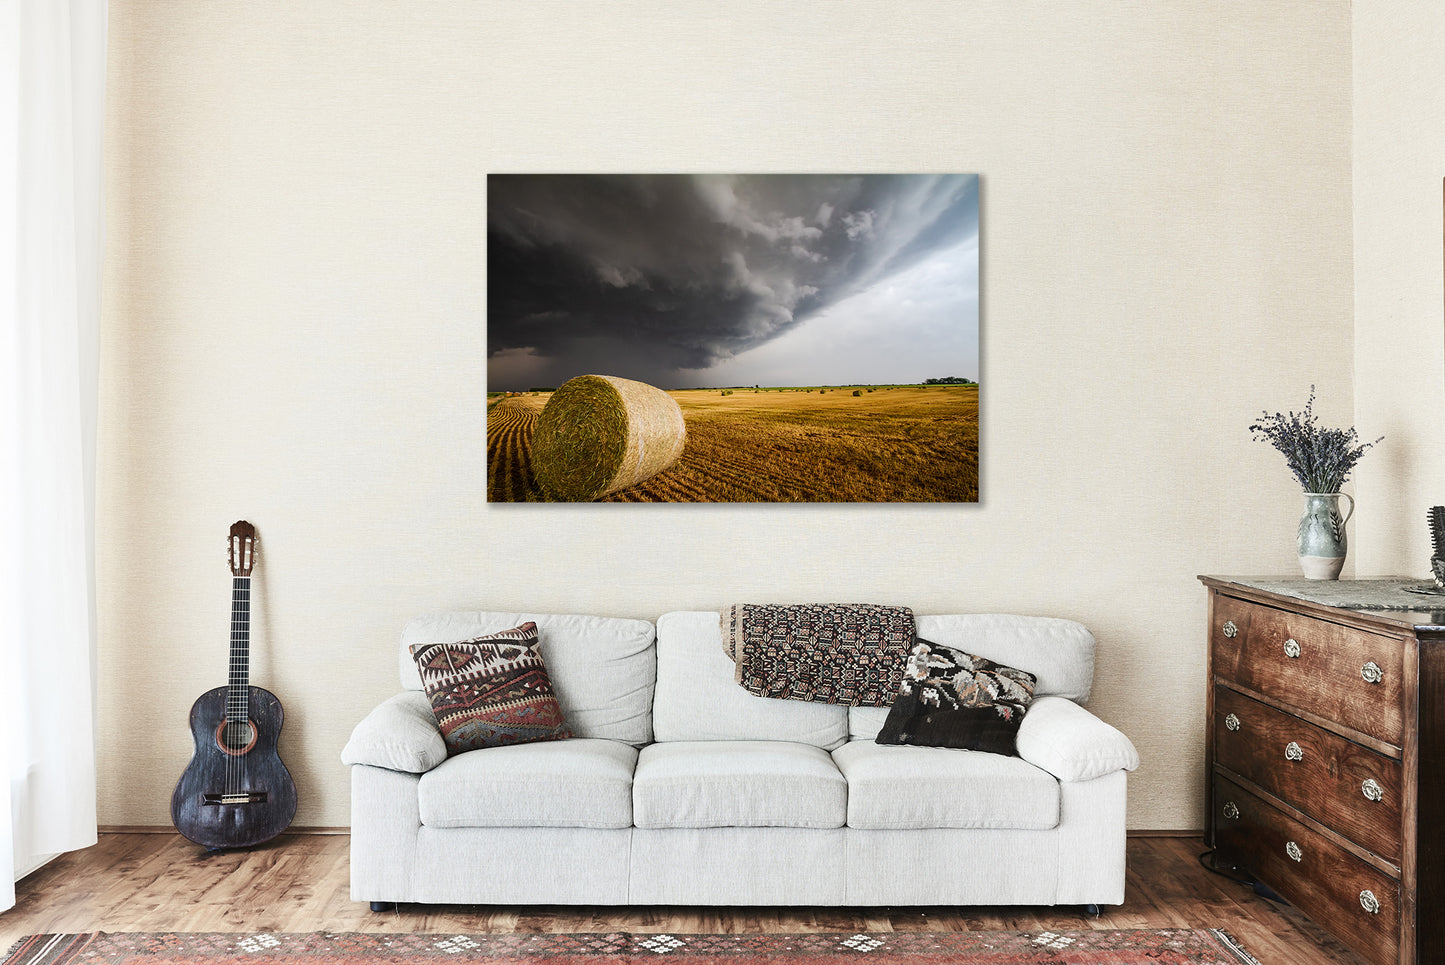 Farm Canvas Wall Art - Gallery Wrap of Golden Round Hay Bale Under Advancing Storm on Spring Day in Kansas - Country Farmhouse Photo Decor